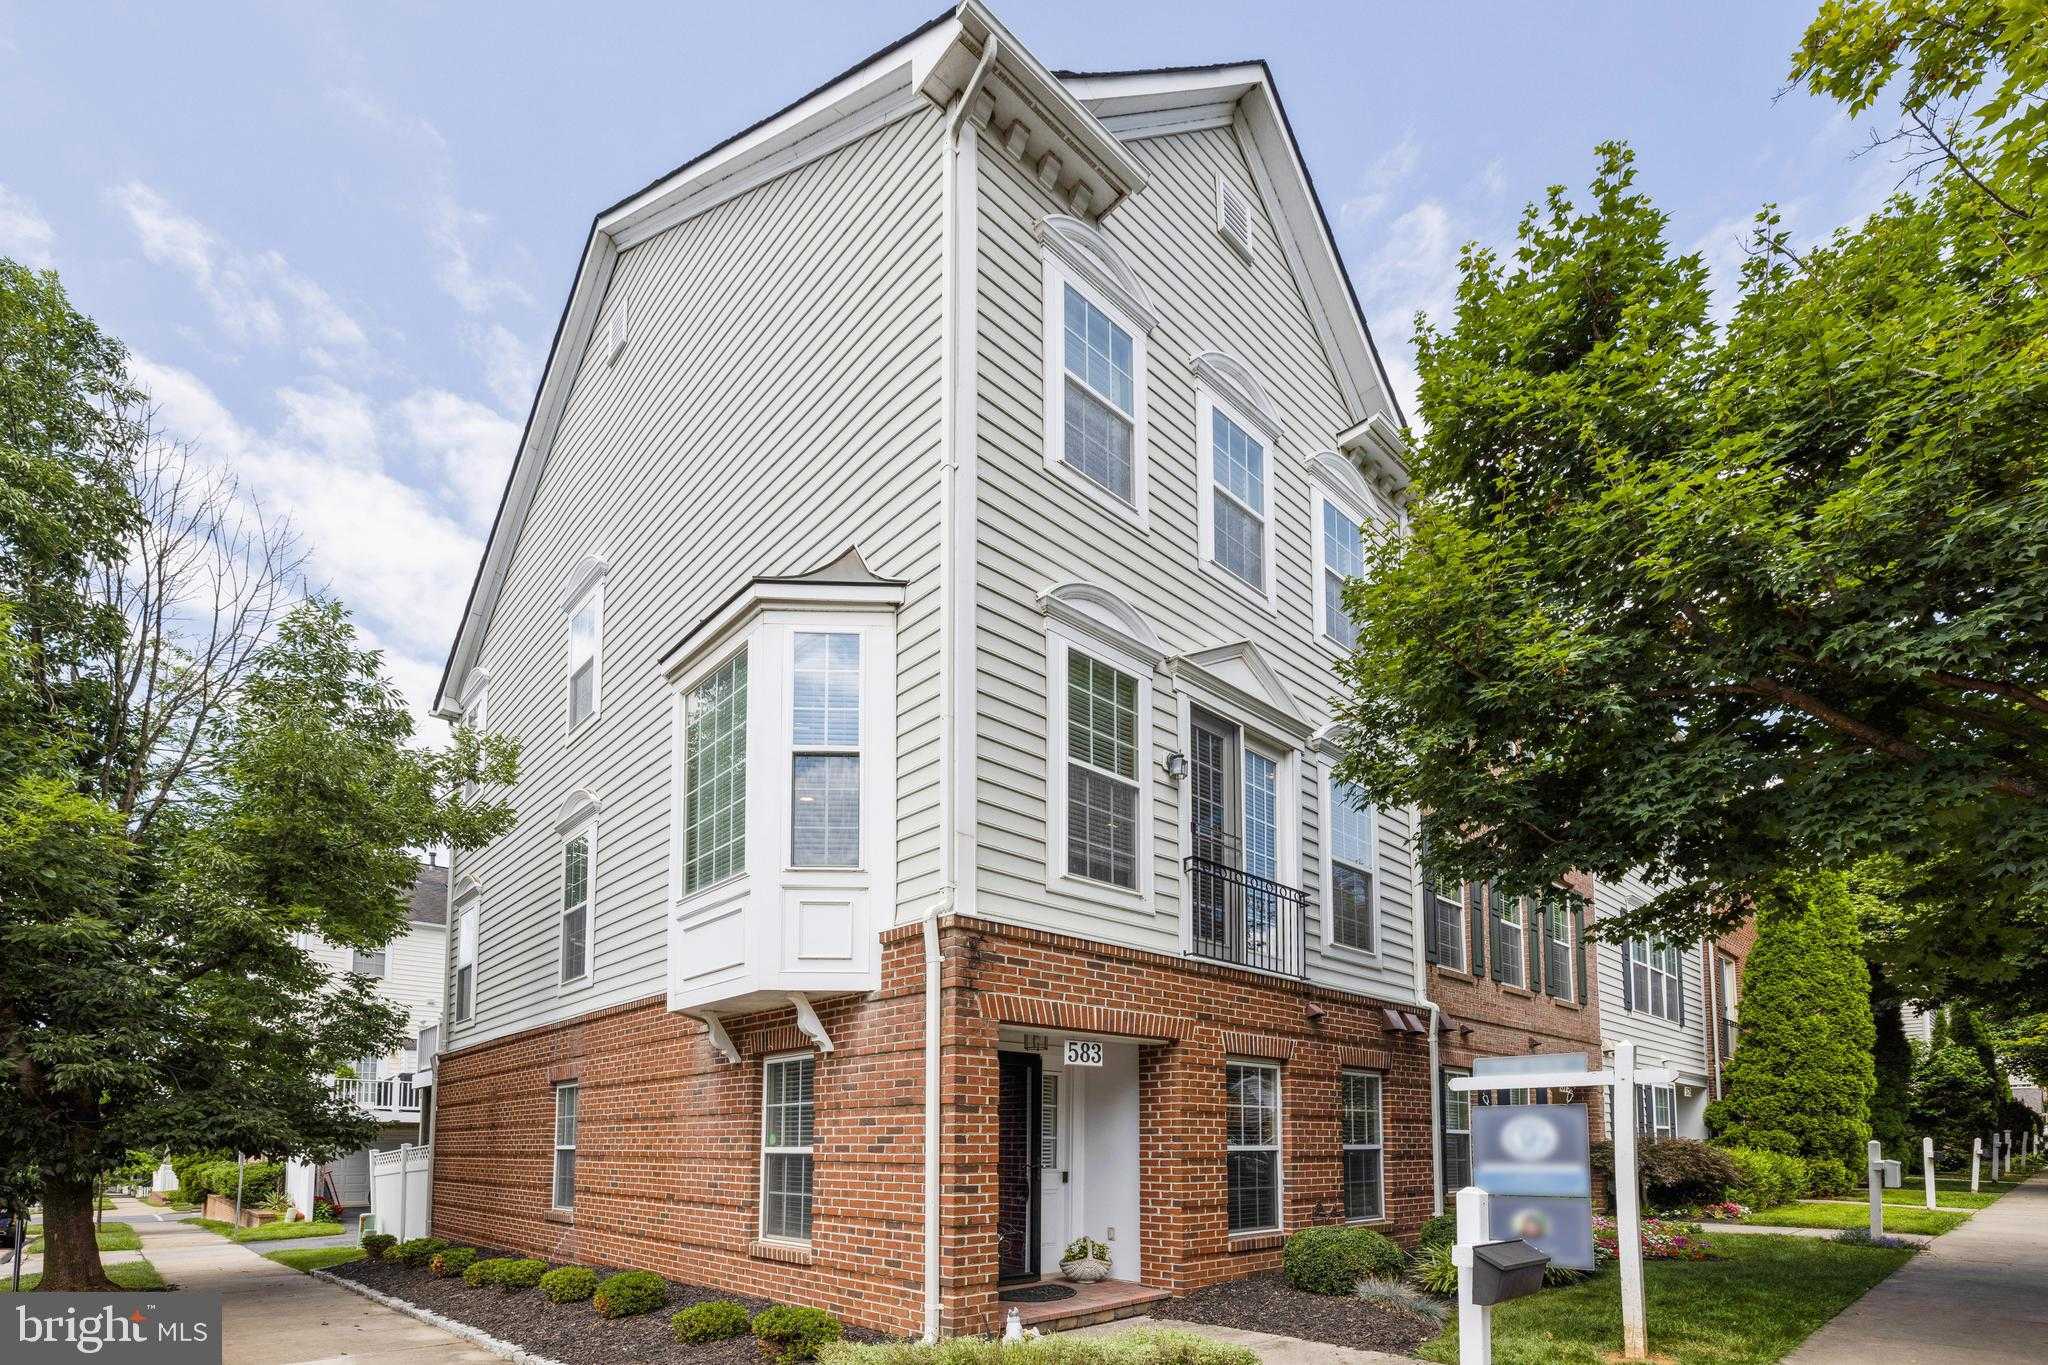 View GAITHERSBURG, MD 20878 townhome